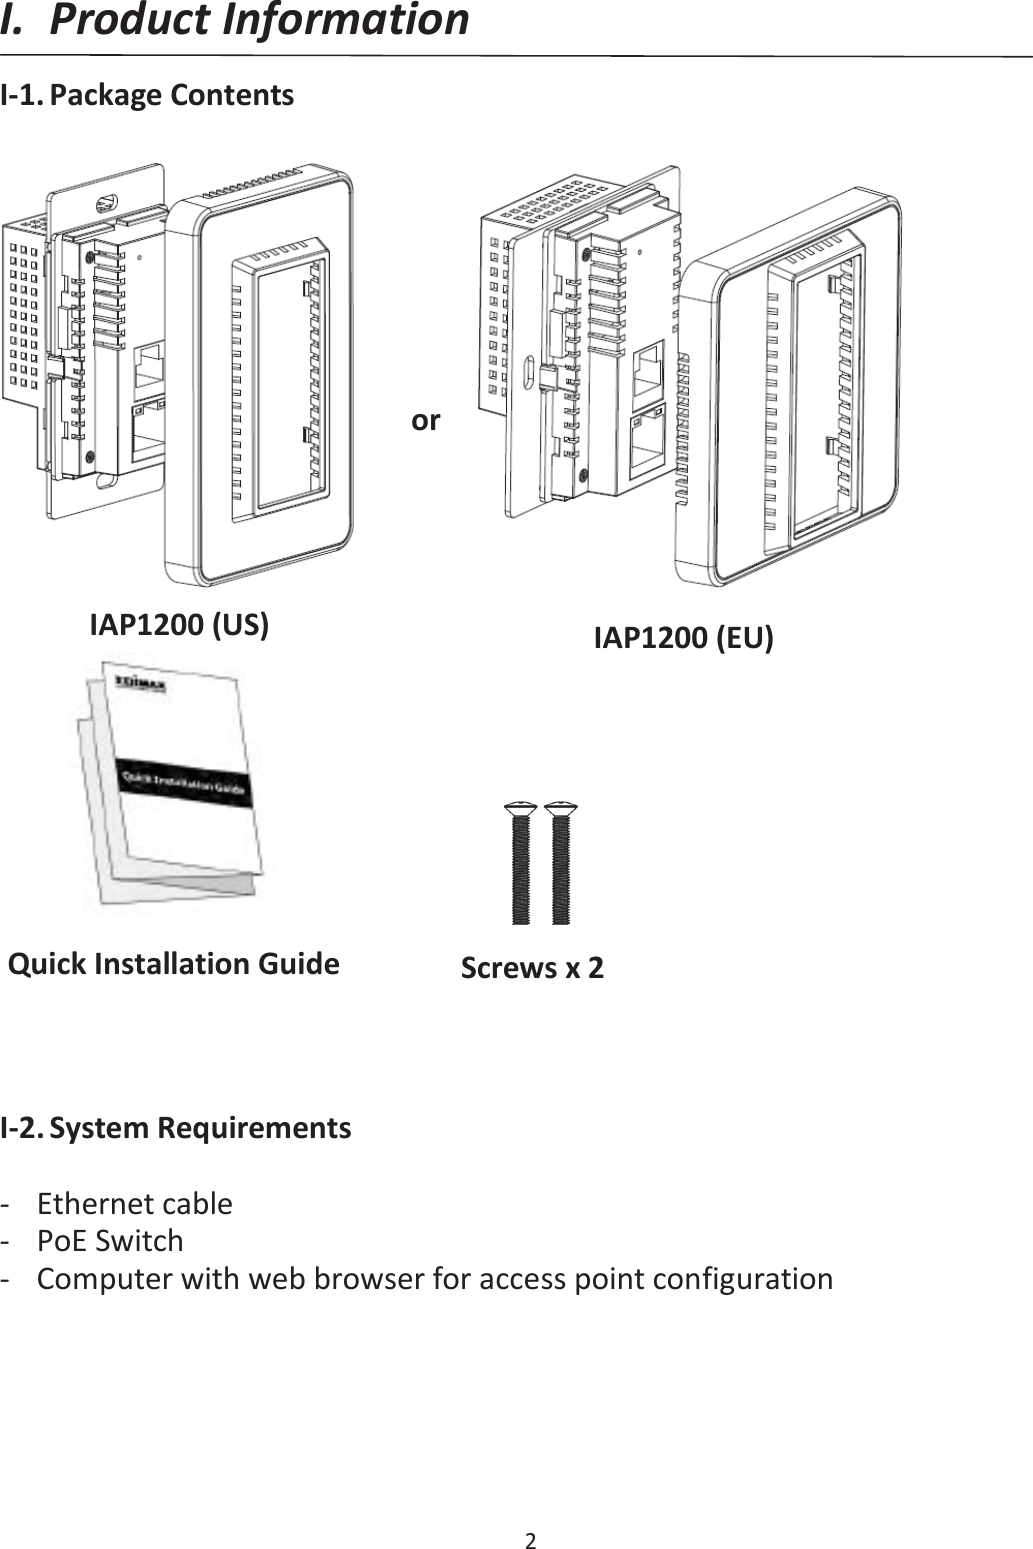 2  I. Product Information I-1. Package Contents                                   I-2. System Requirements  - Ethernet cable -PoE Switch - Computer with web browser for access point configuration      Quick Installation Guide Screws x 2 IAP1200 (US) IAP1200 (EU) or 